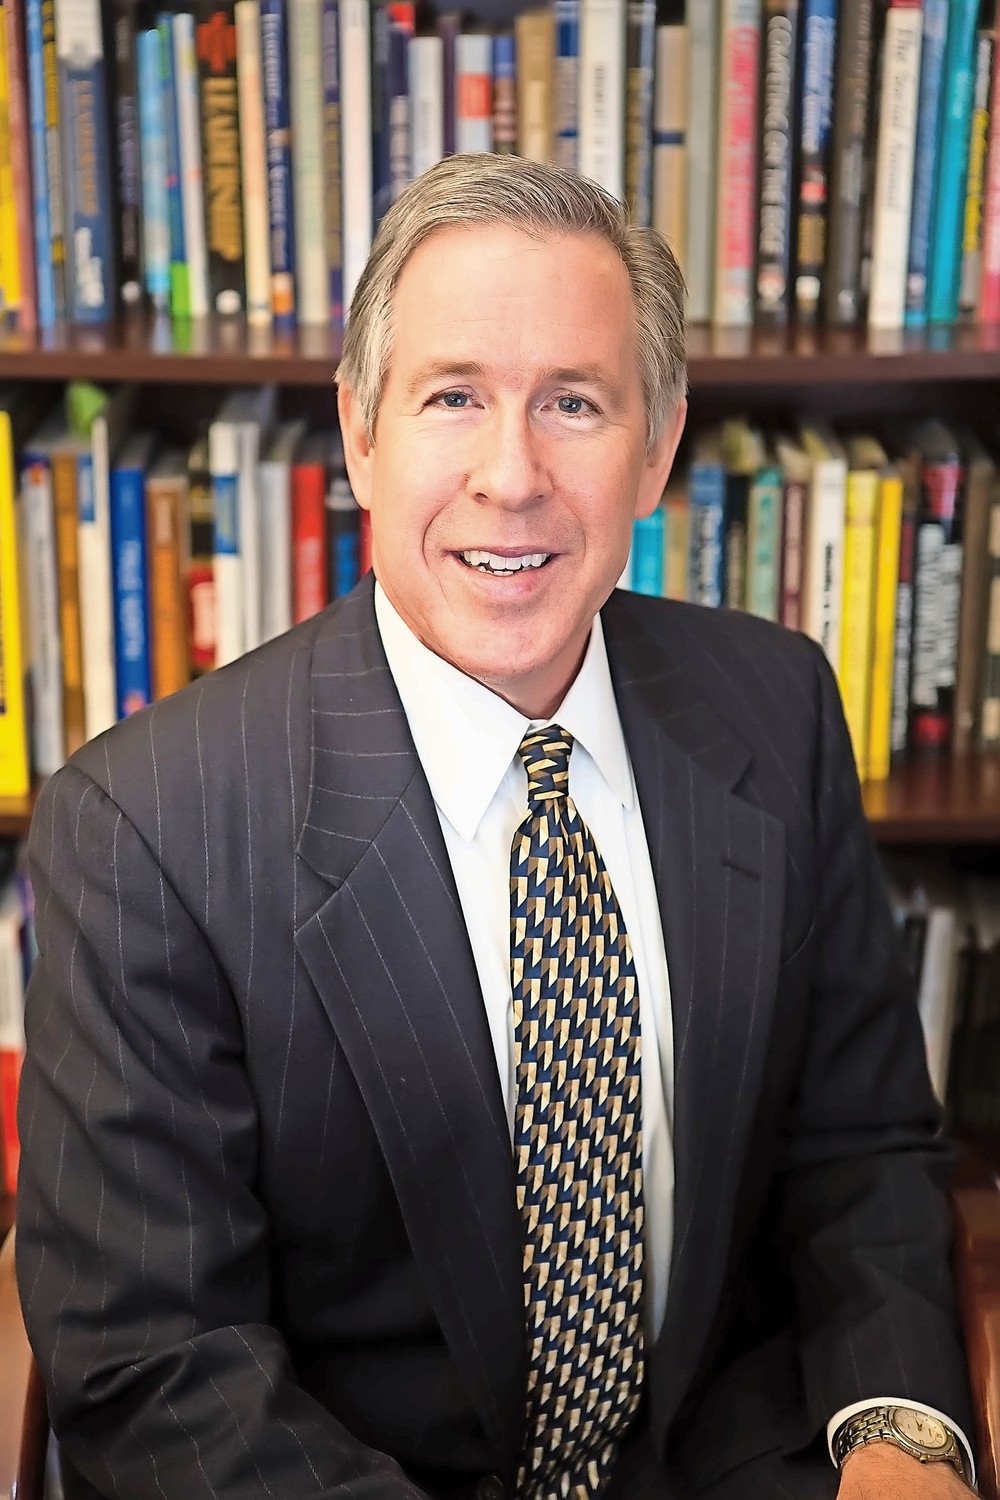 Don Gibson will join Manhattan College as the dean of the O?Malley School of Business this summer. Gibson is leaving his post as Vice Provost in the Office of Academic Affairs at Fairfield University in Connecticut.